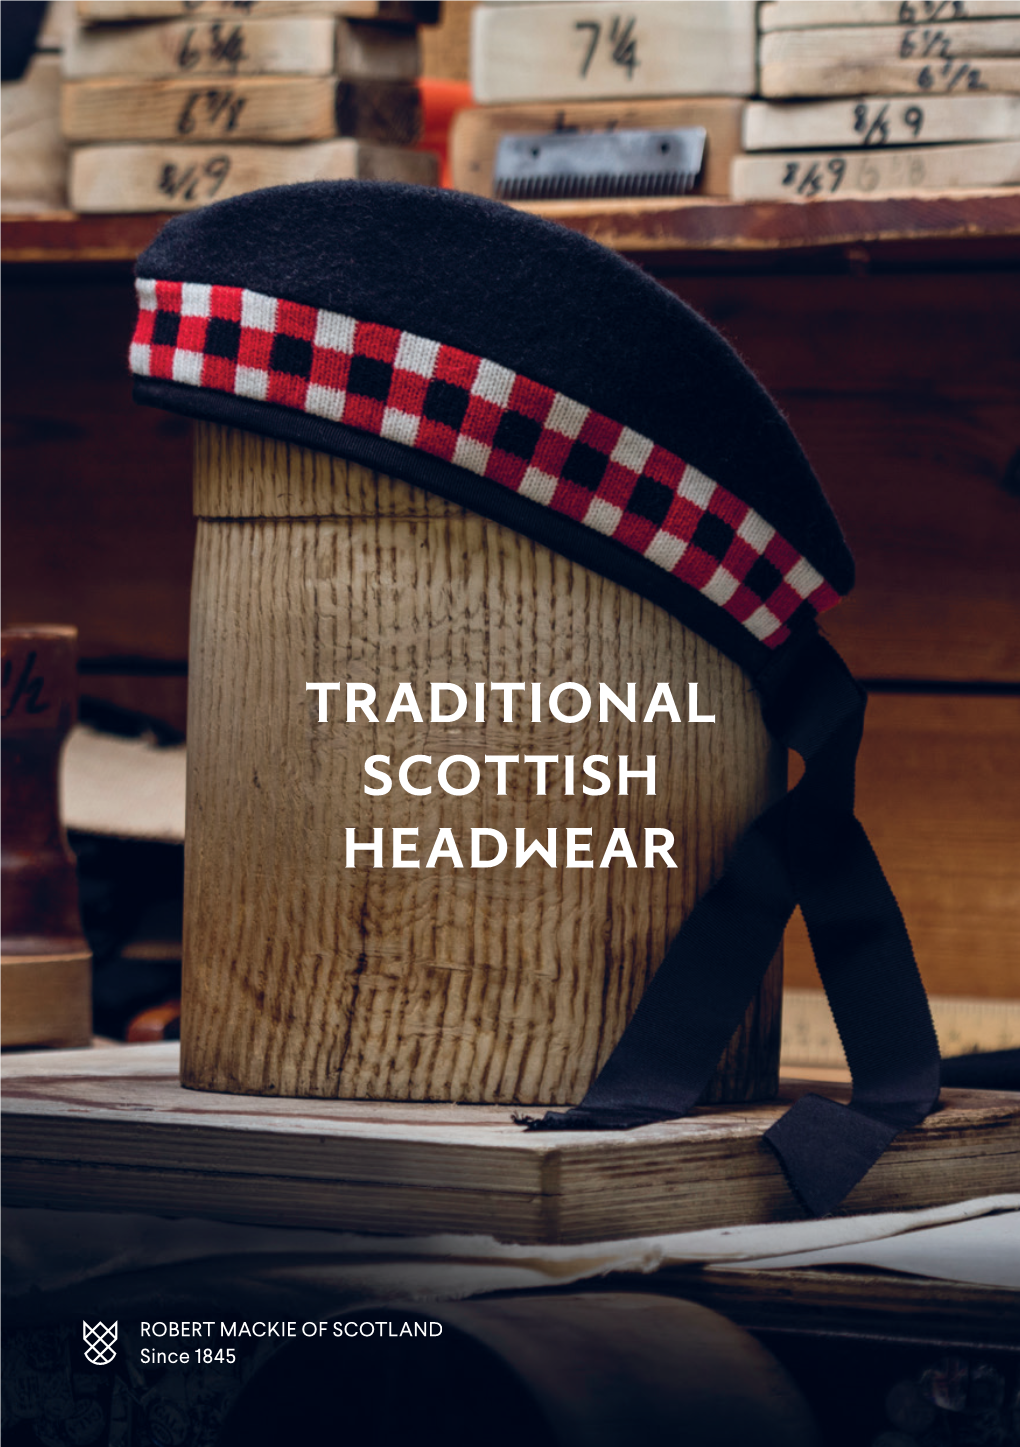 TRADITIONAL SCOTTISH HEADWEAR Our Story